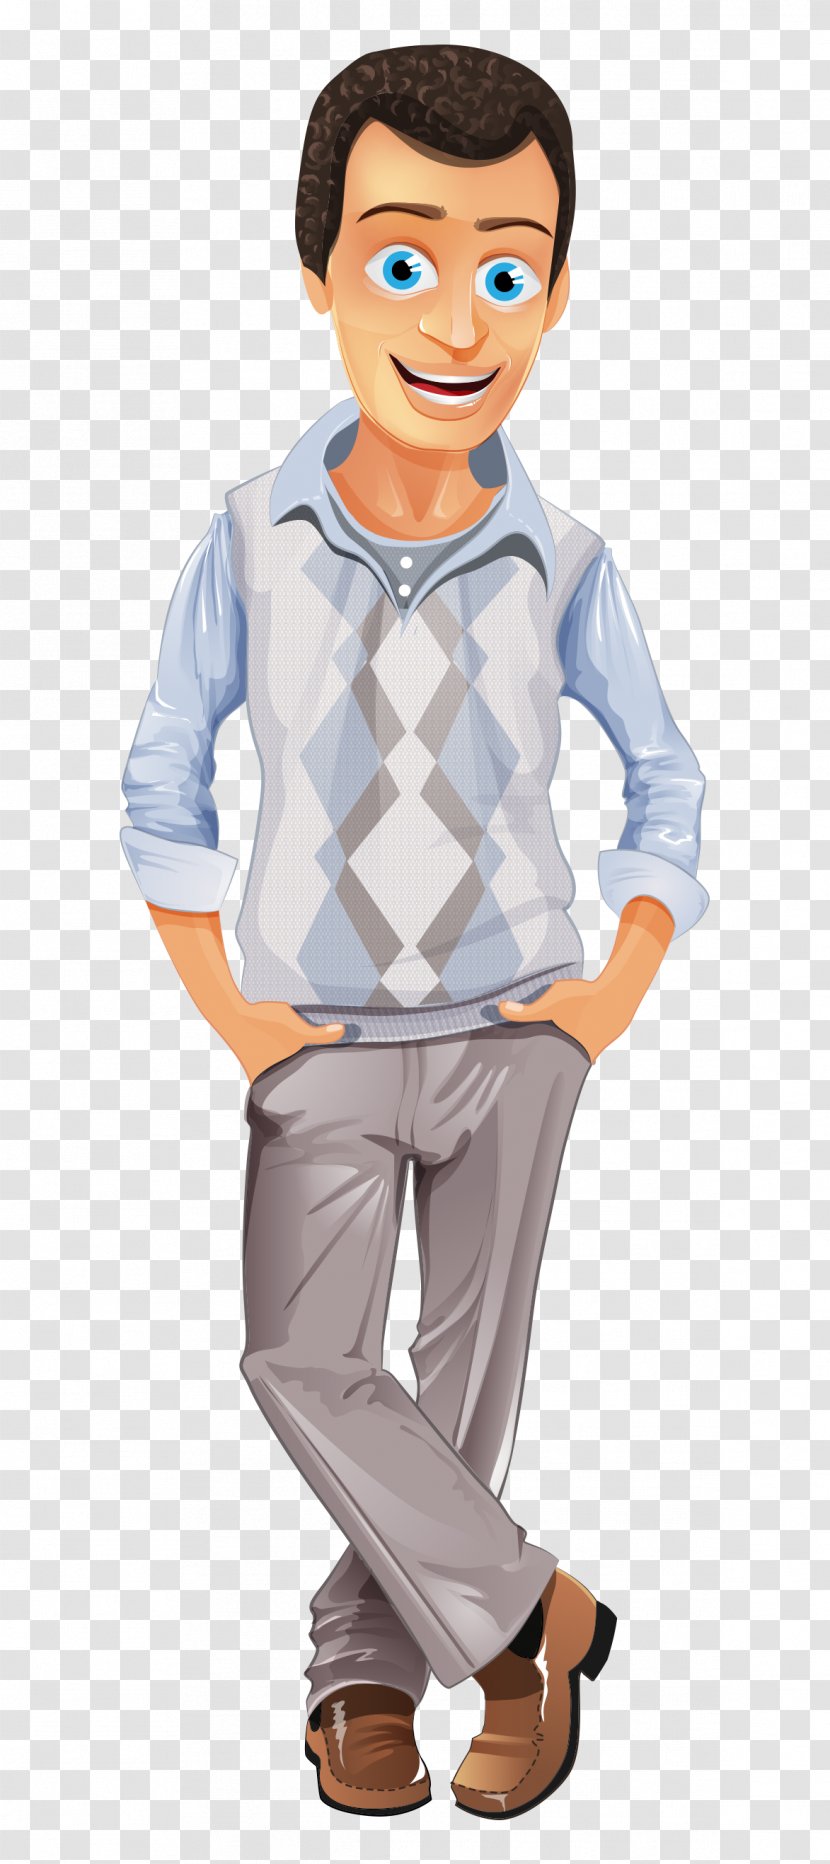 Business Casual Friday Clip Art - Toddler - Fashion Hand-painted Cartoon Man Transparent PNG